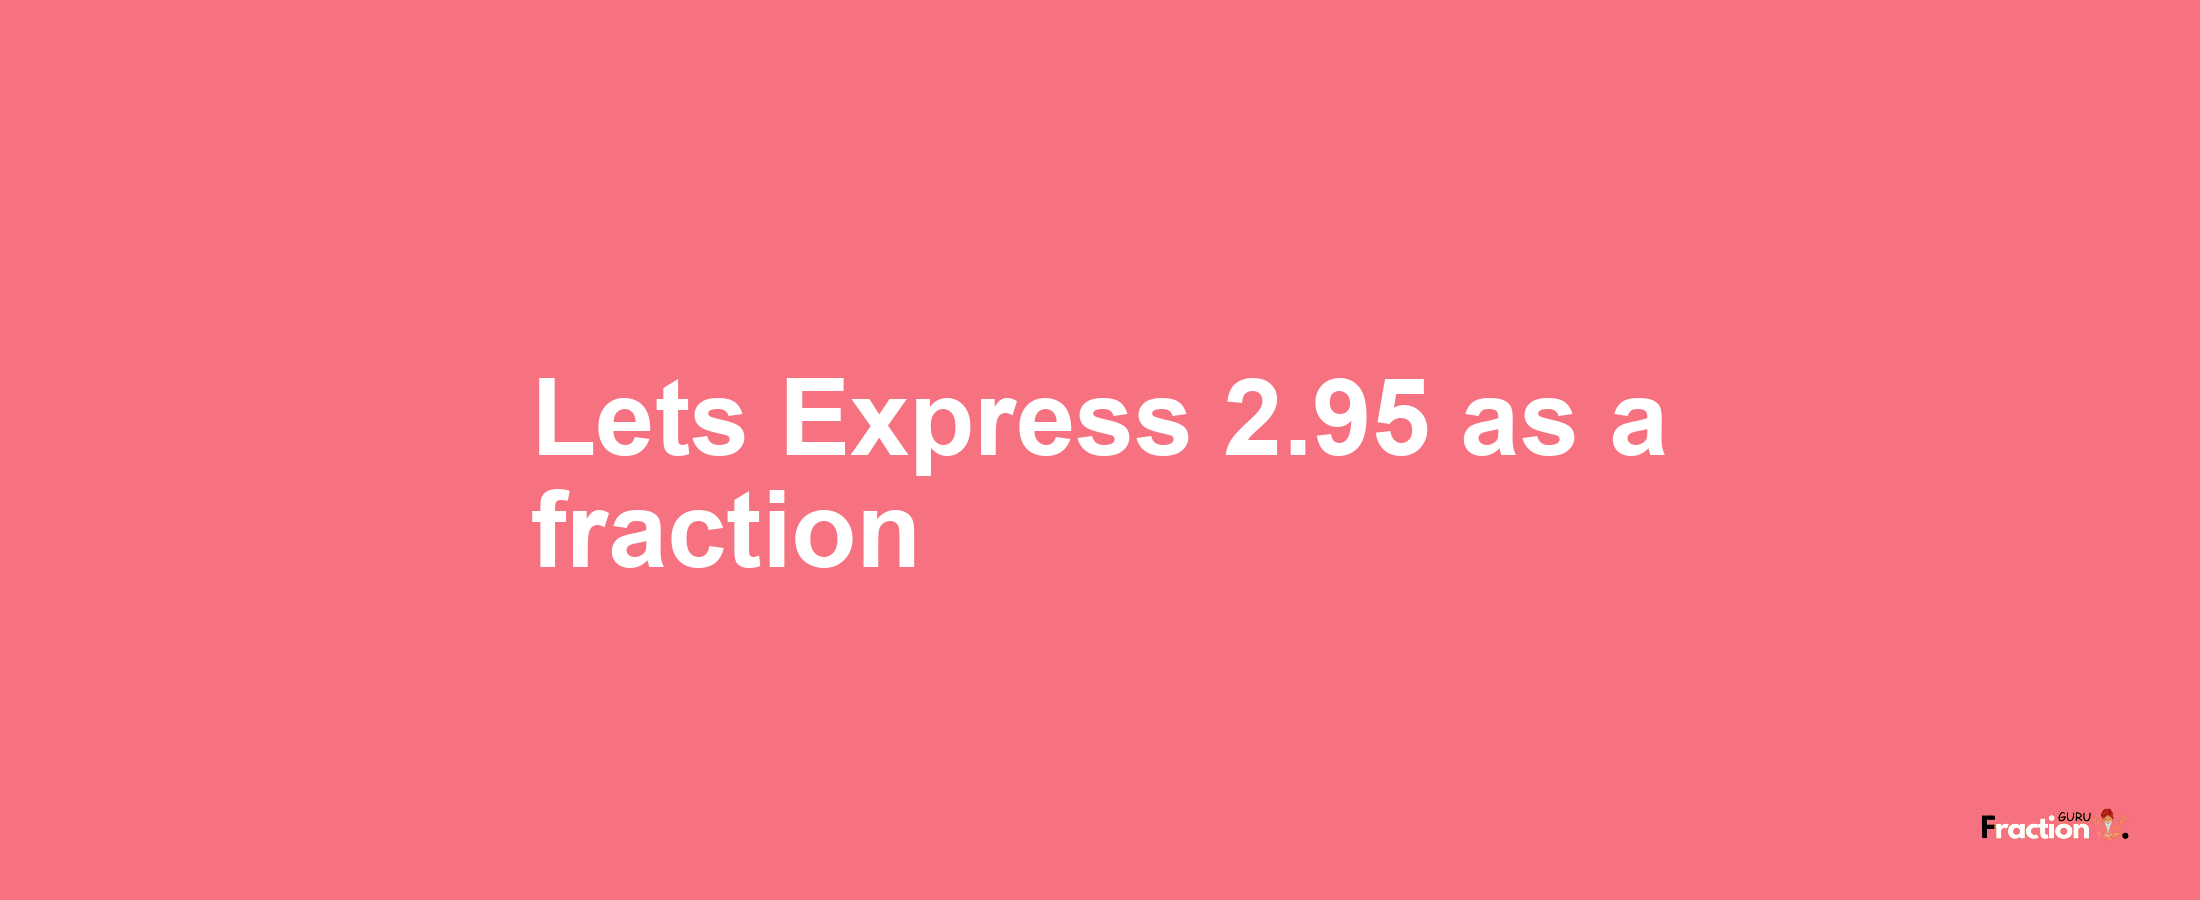 Lets Express 2.95 as afraction